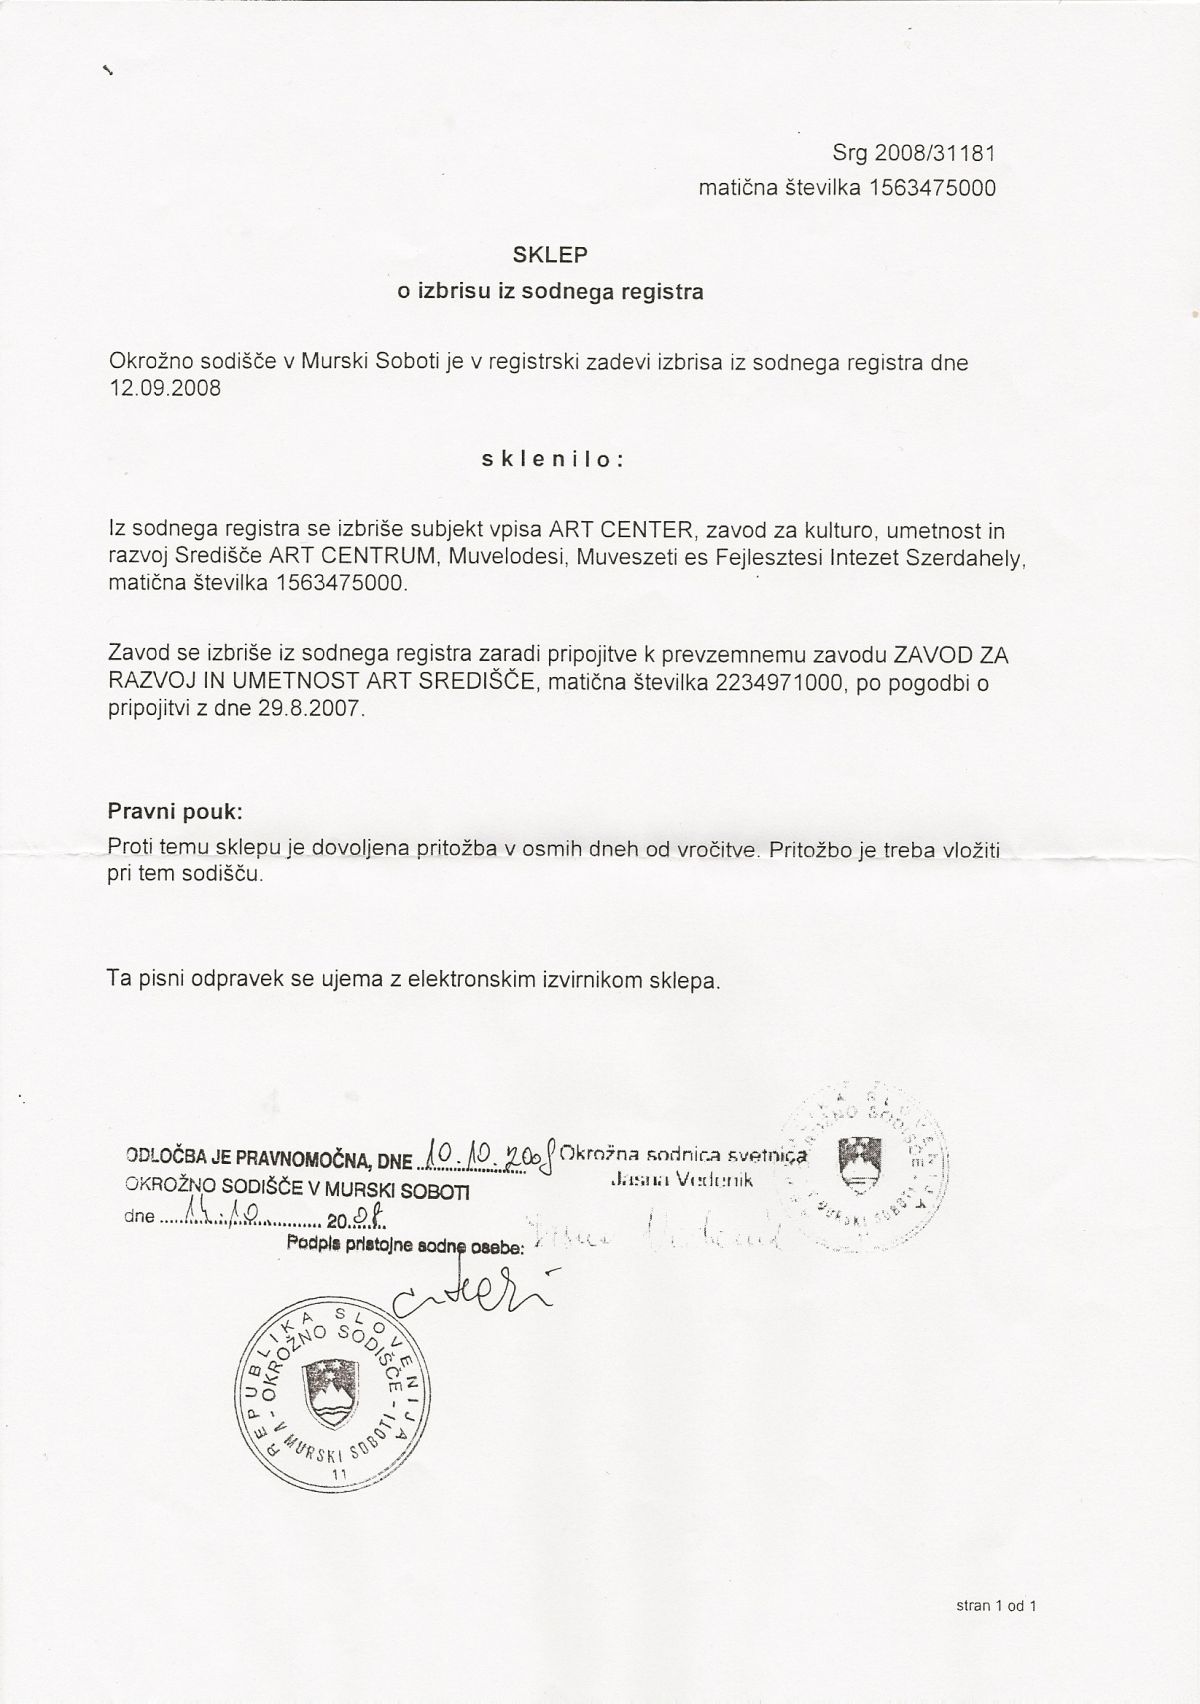 Court Register: Registration of the merger of the Art Center Institution with the Art Središče, October 2008. The union enabled the revival of the art centre.